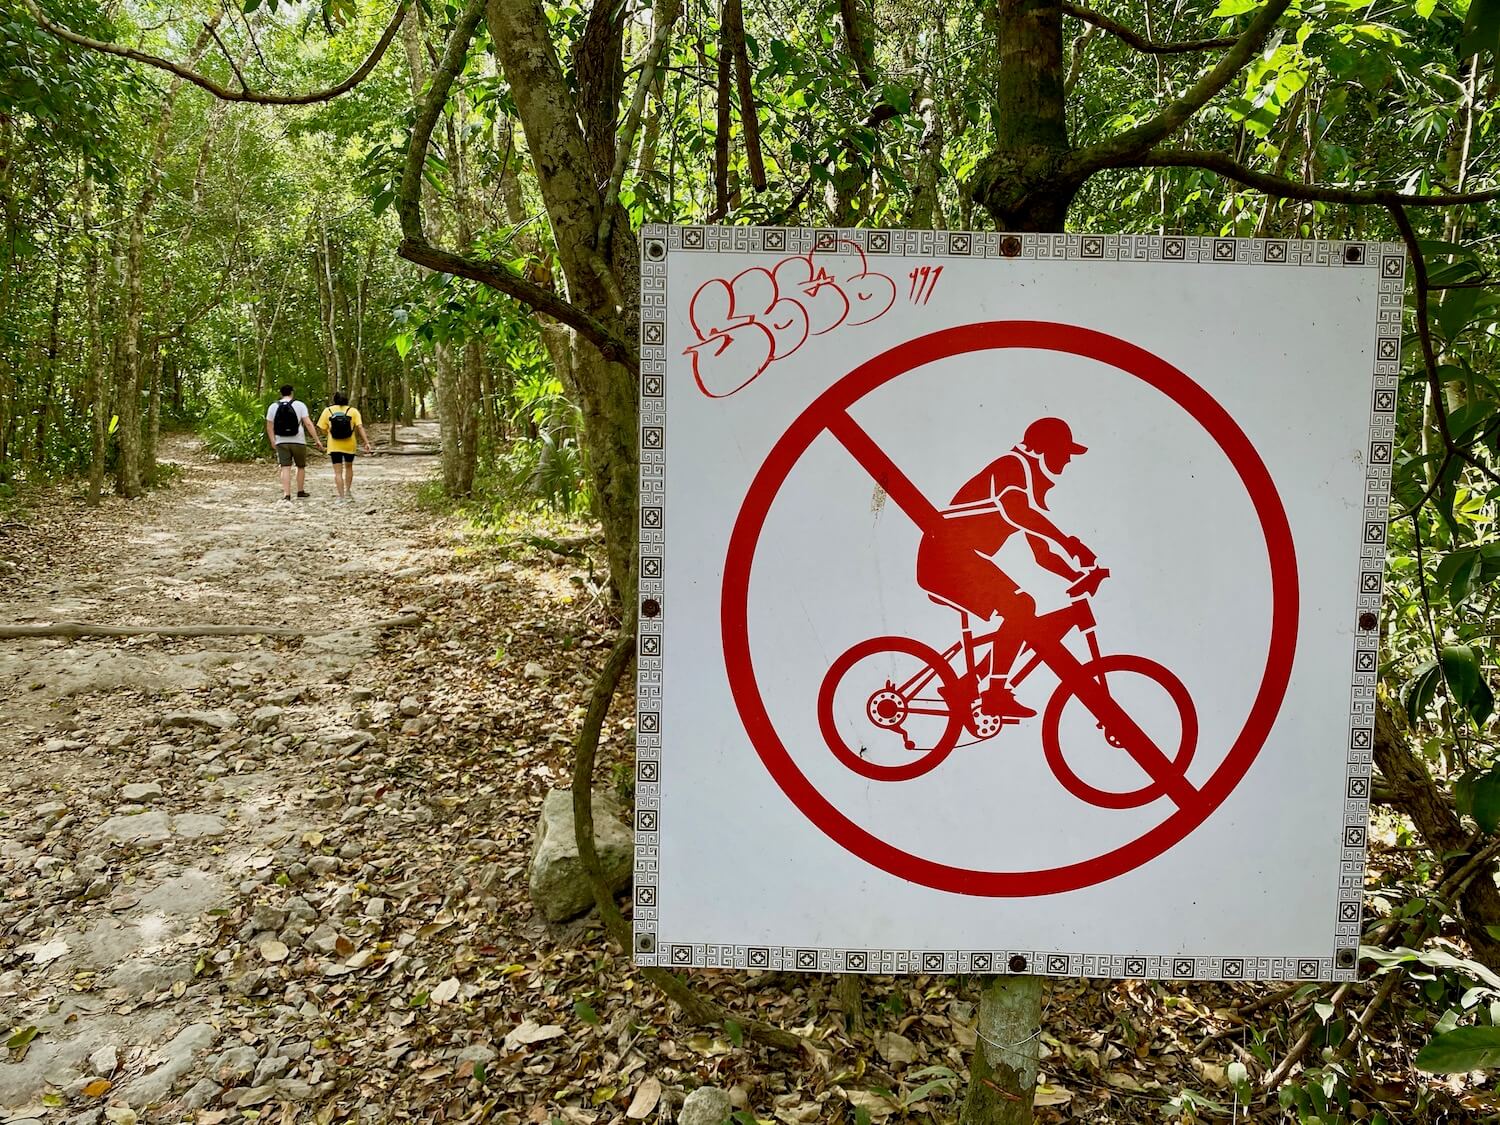 Explore Coba travel tips include getting off the main bicycle road and hiking a little.  A brightly colored white square sign with a red figure depicting a bicycle rider with a circle and x through it indicates the pathway of white rock in Coba archeological site is not open to cyclists. In the background a couple wearing white and yellow shirts walks amongst the thick jungle vegetation on a white stone, leaf covered walking path used over a thousand years ago by the Mayans living in this Coba settlement.  